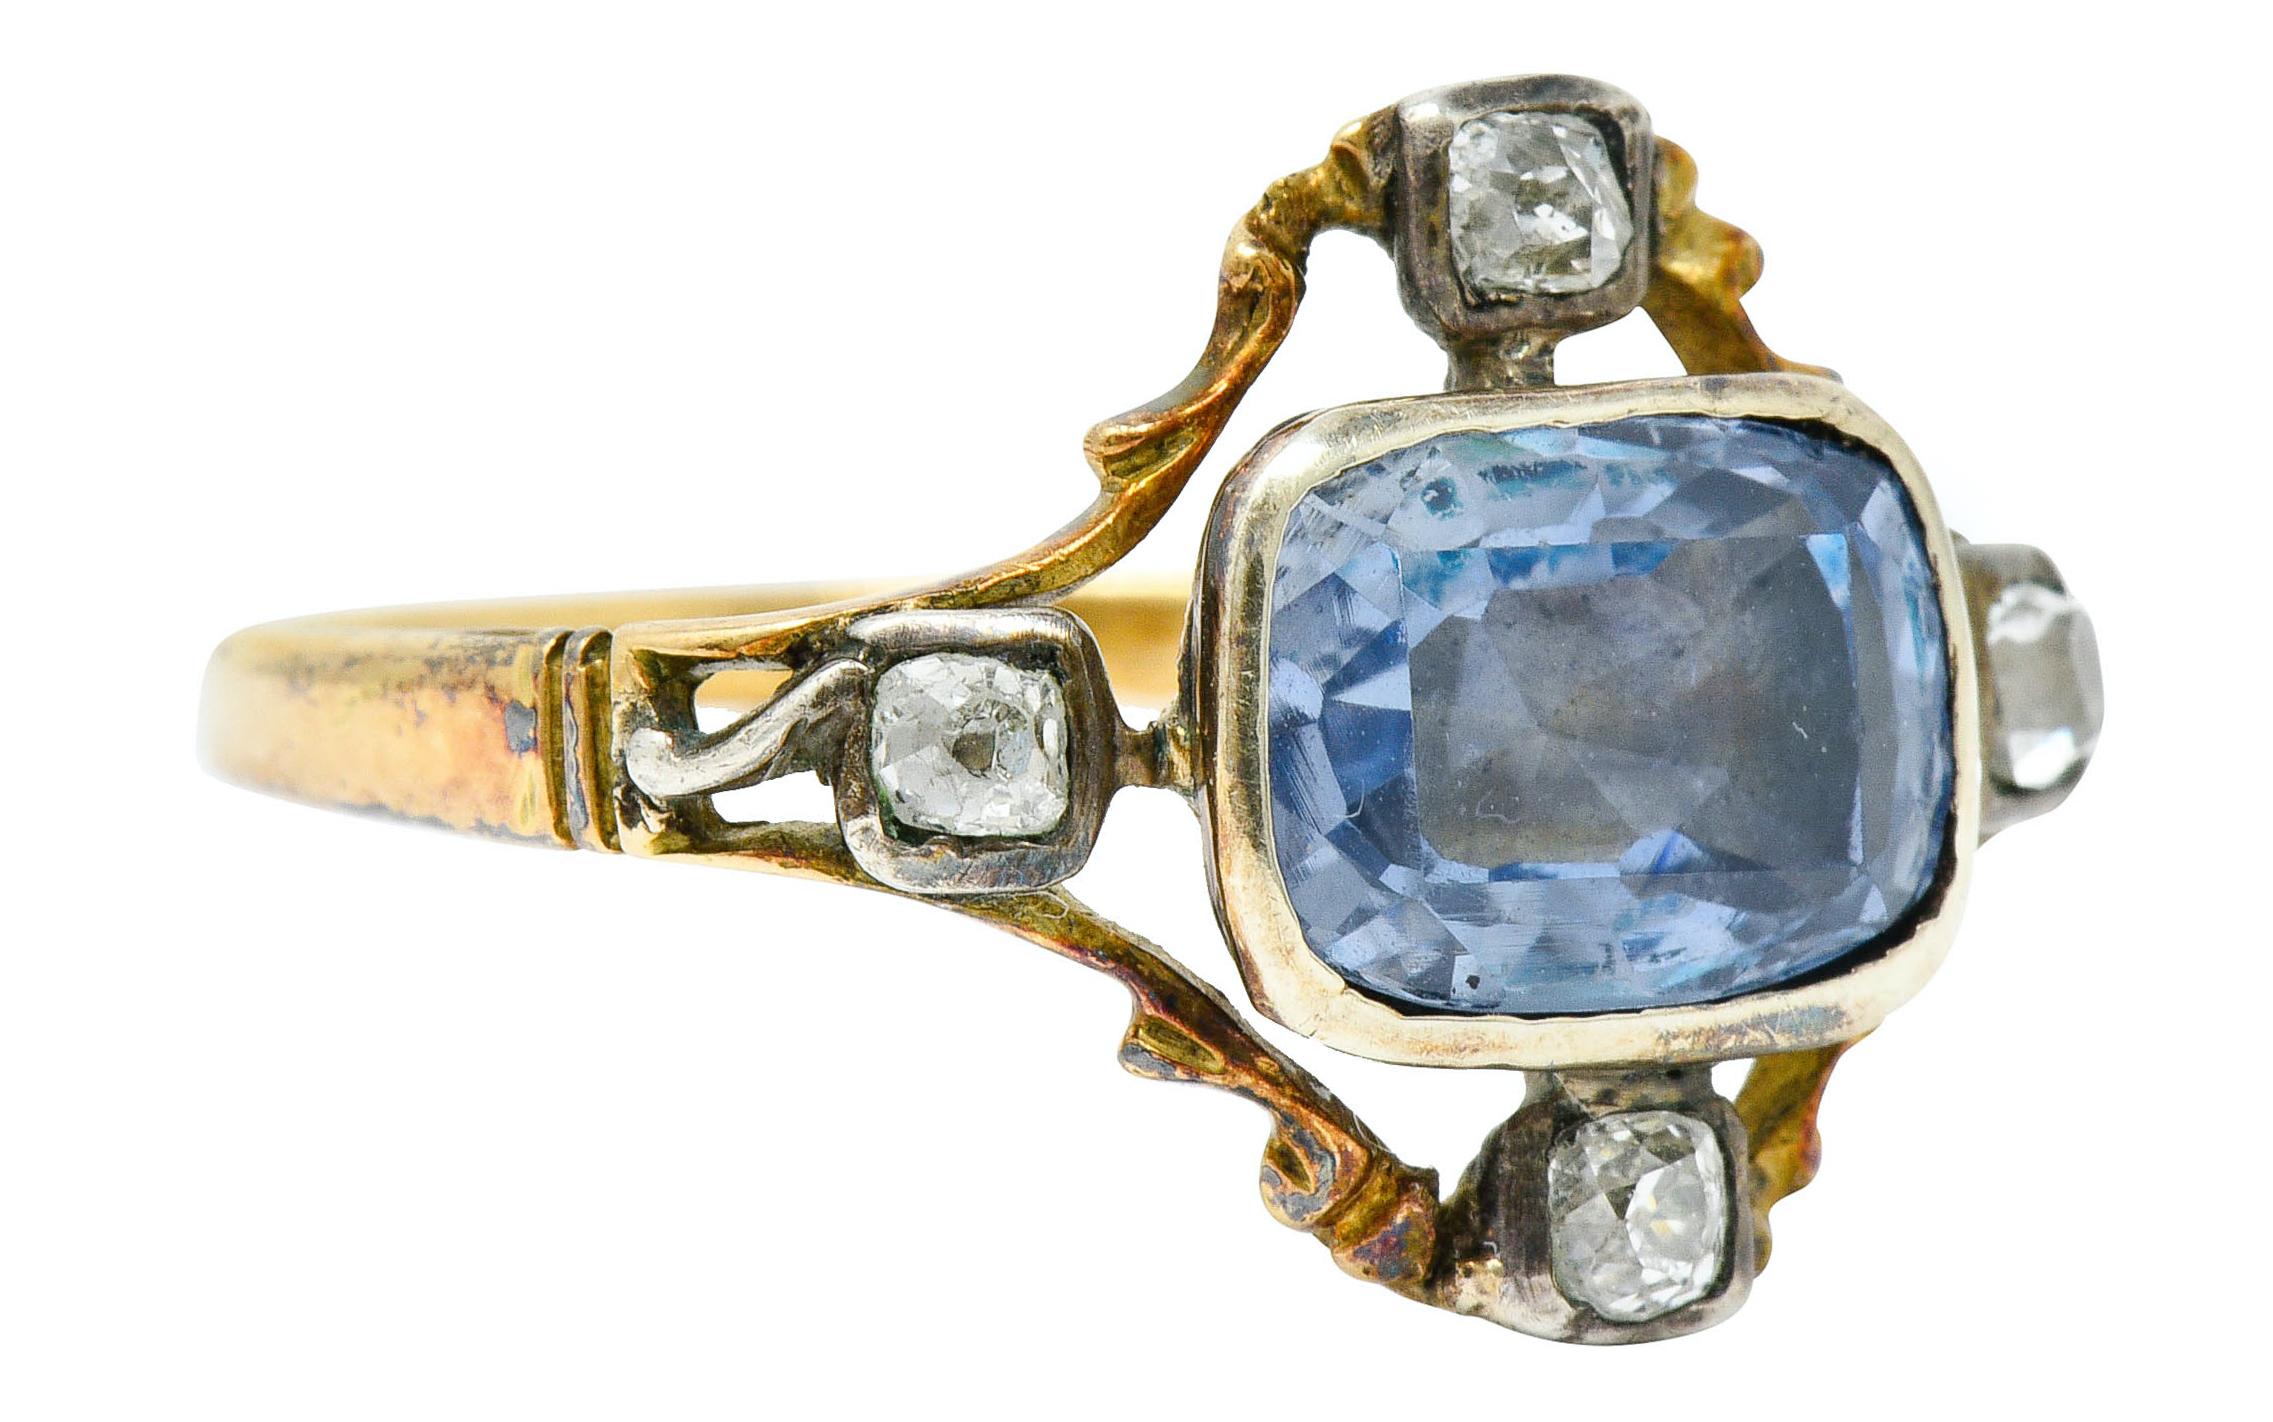 Centering a rectangular cushion cut sapphire weighing approximately 2.00 carats

Transparent with light blue color and foil backing that does not alter light blue color

Surrounded by old mine and old single cut diamonds at each cardinal point

Set